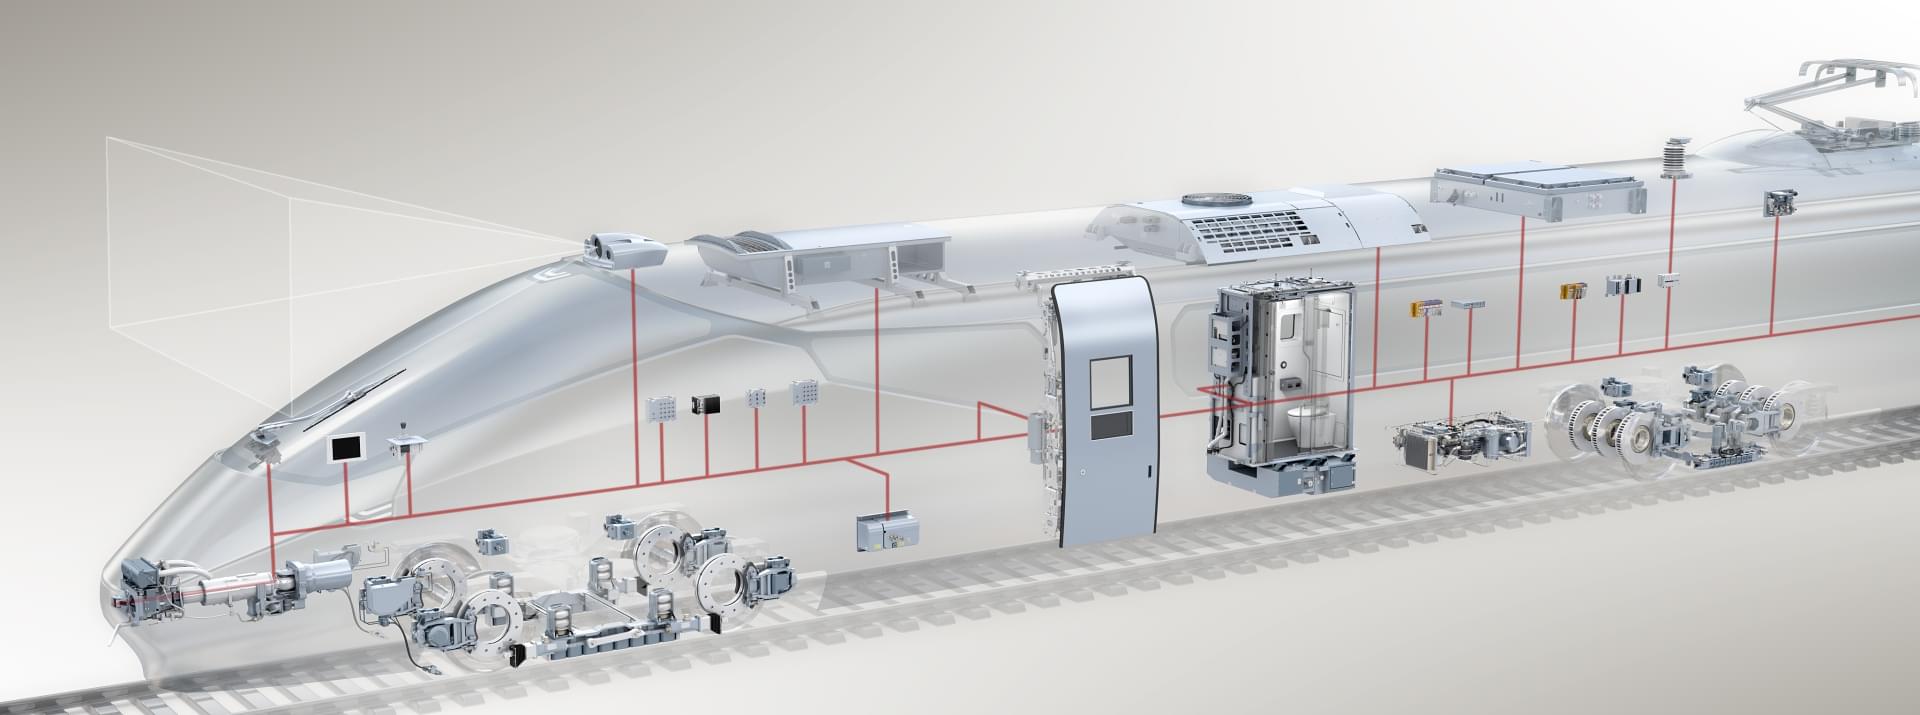 Translusant train with Components of the Knorr Bremse Group